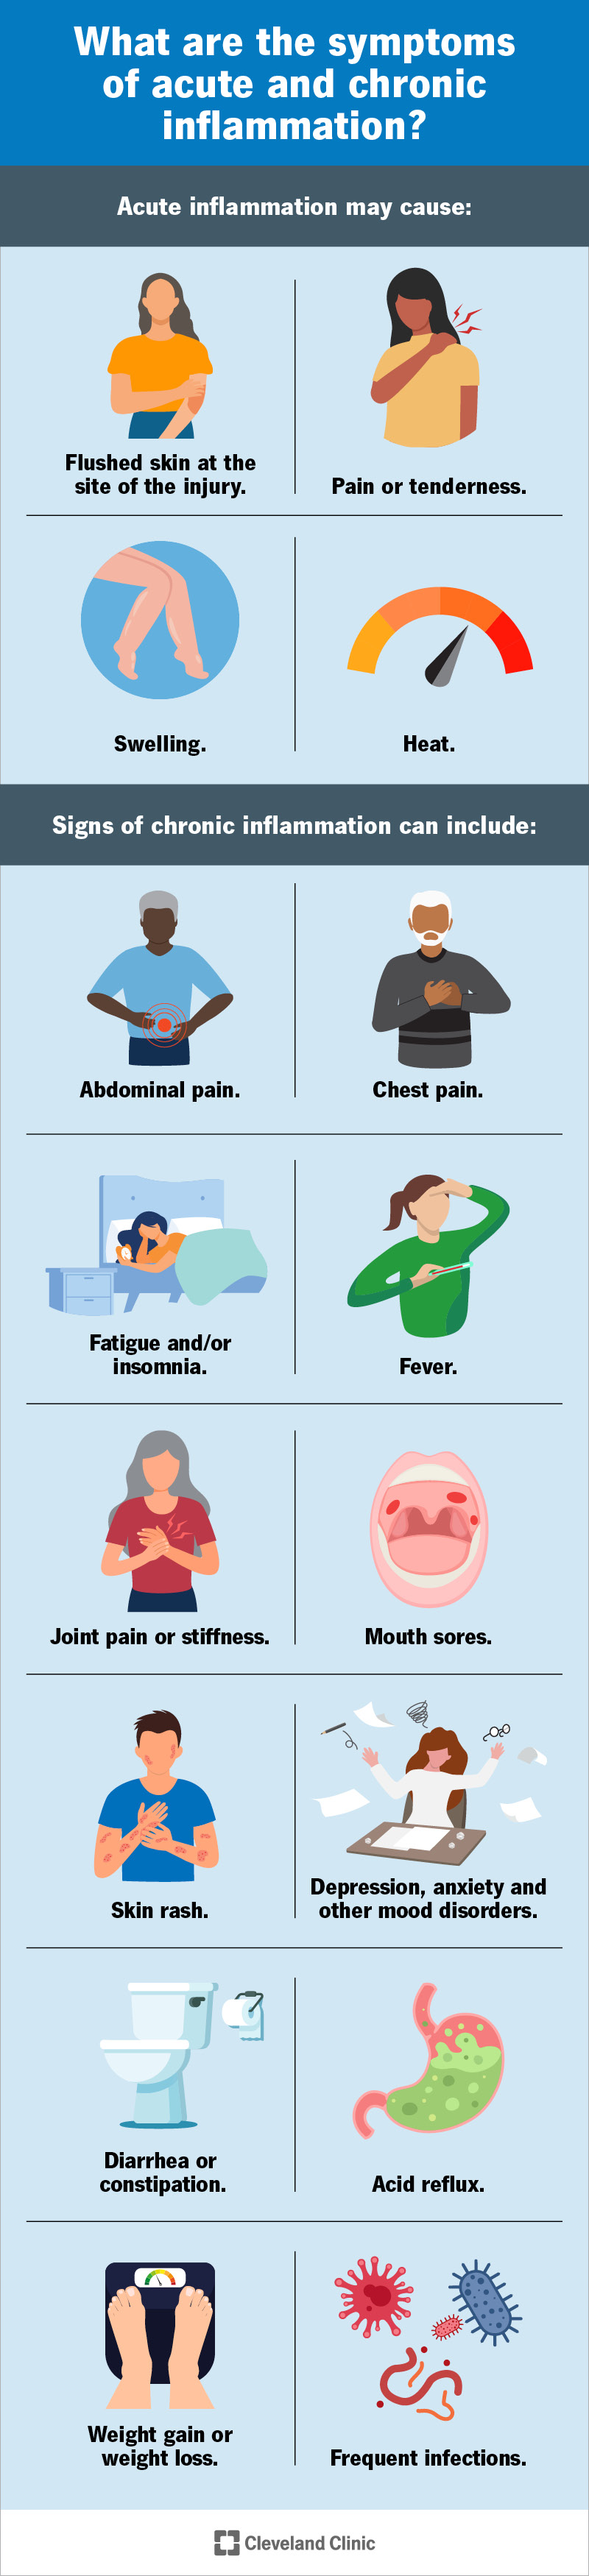 Signs and symptoms of acute and chronic inflammation